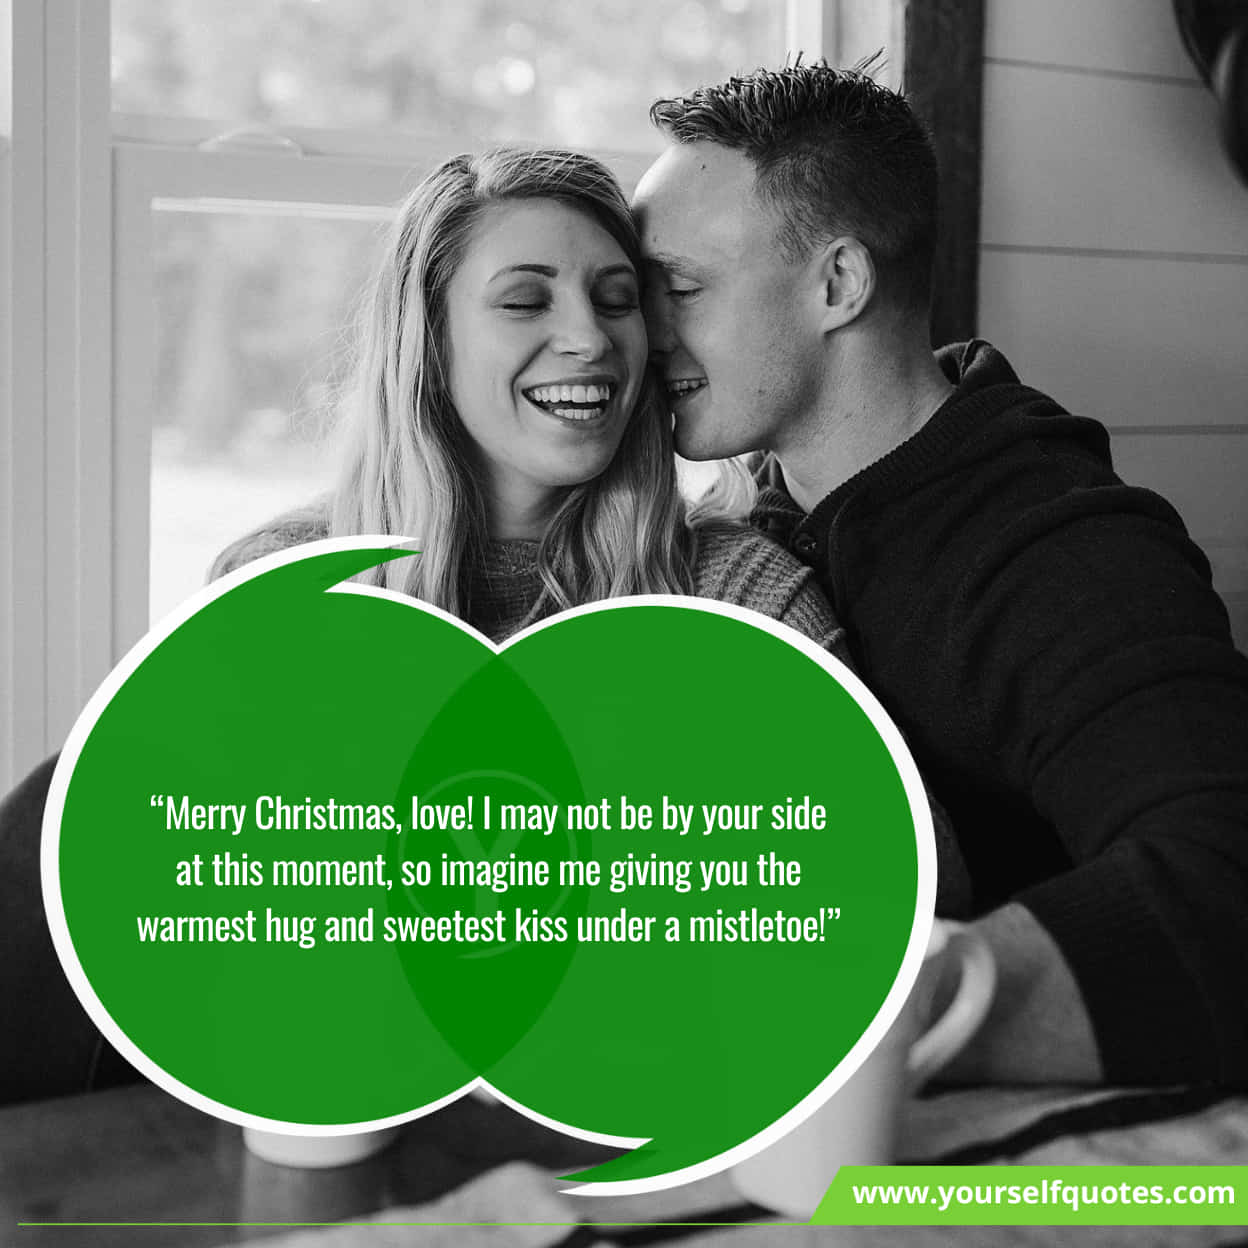 Christmas Wishes Images for Boyfriend